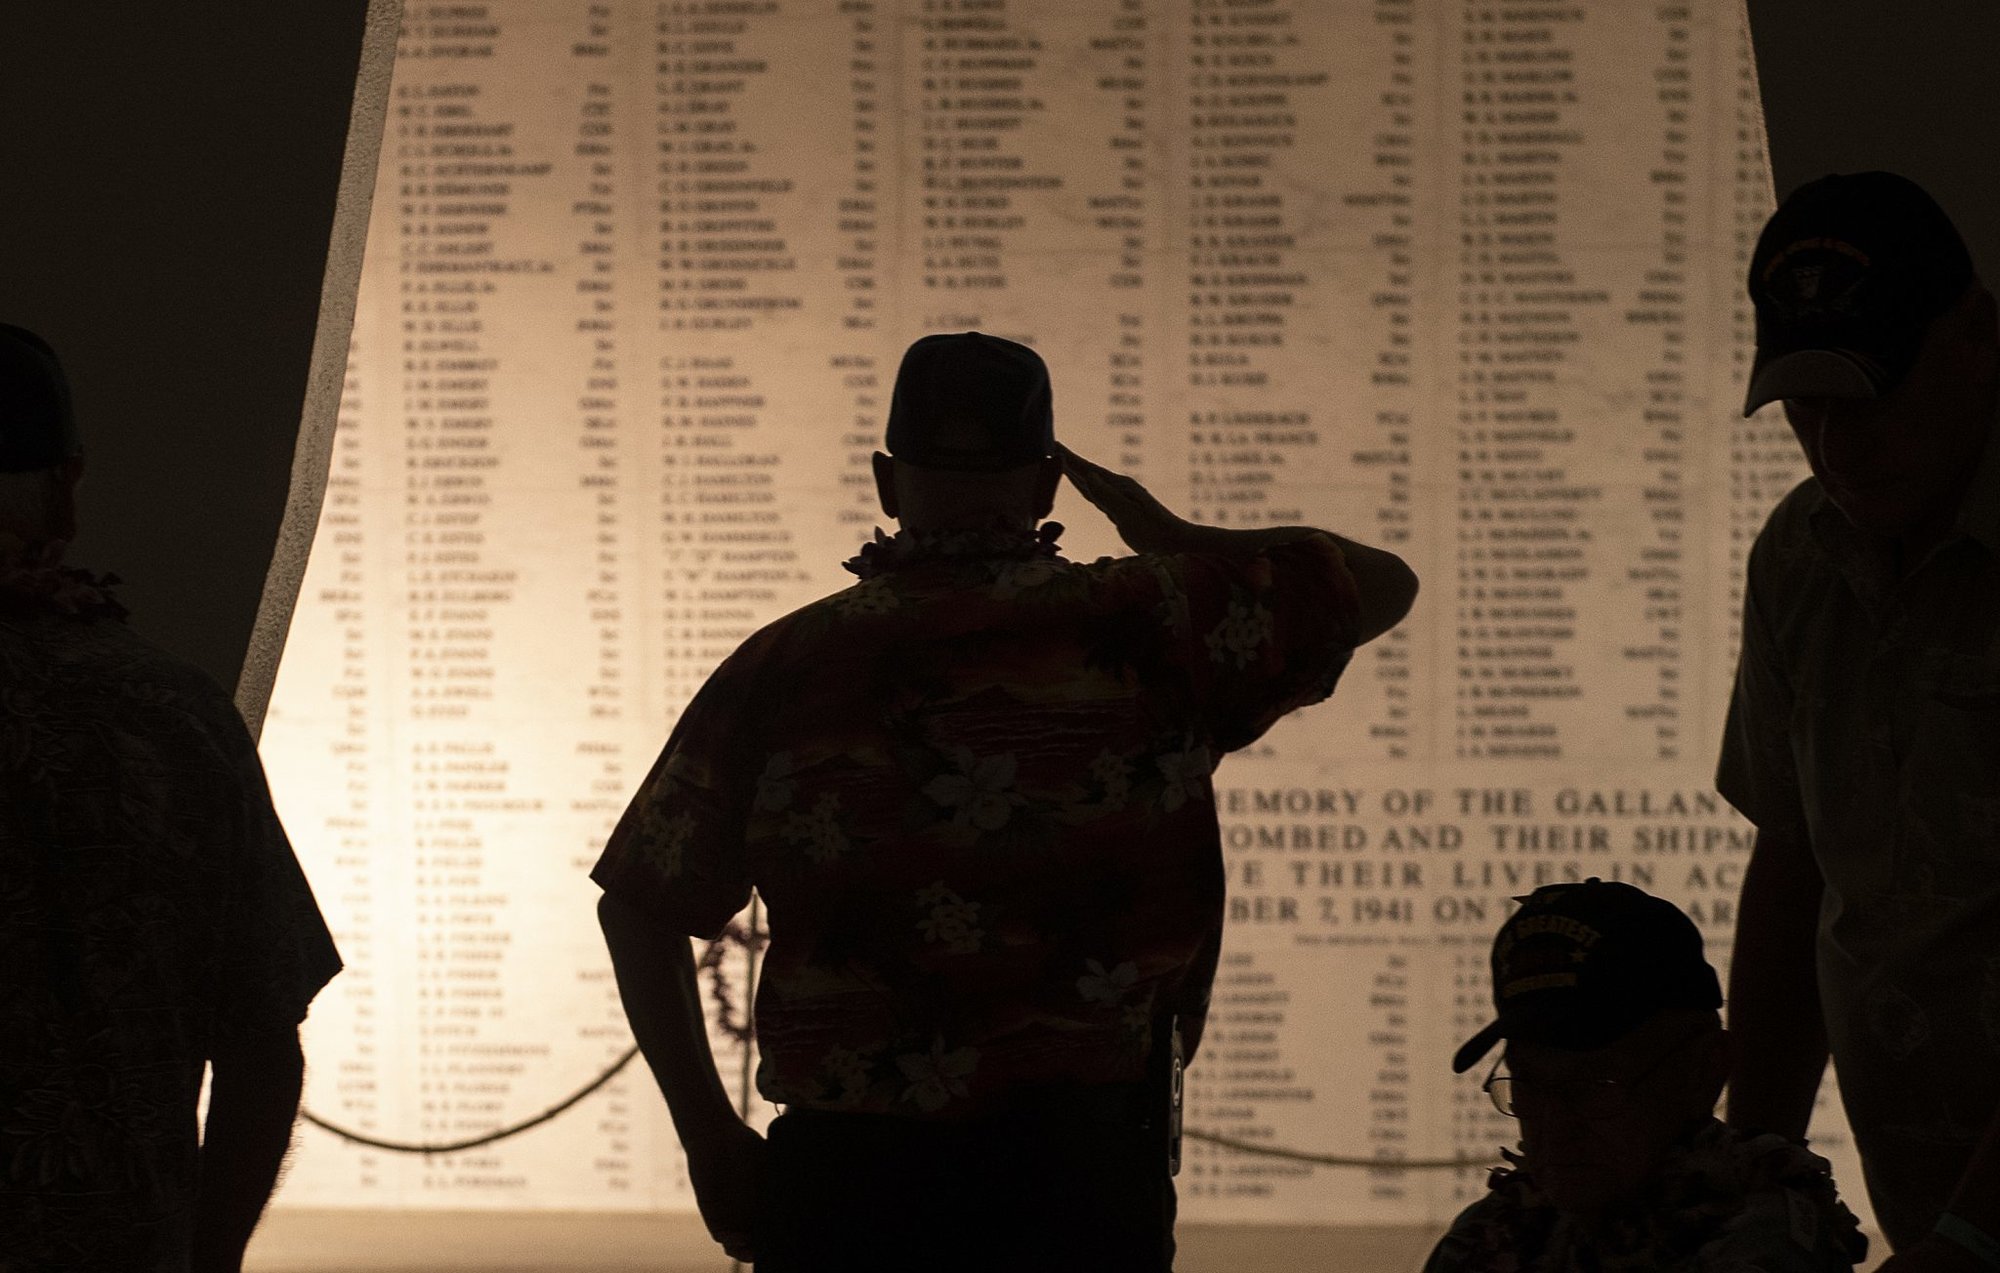 Edward Hoeschen salutes the wall of names at the USS Arizona Memorial during the 78th Anniversary Pearl Harbor Remembrance Commemoration Dec. 7, 2019. US Navy photo by Mass Communication Specialist 1st Class Holly L. Herline.